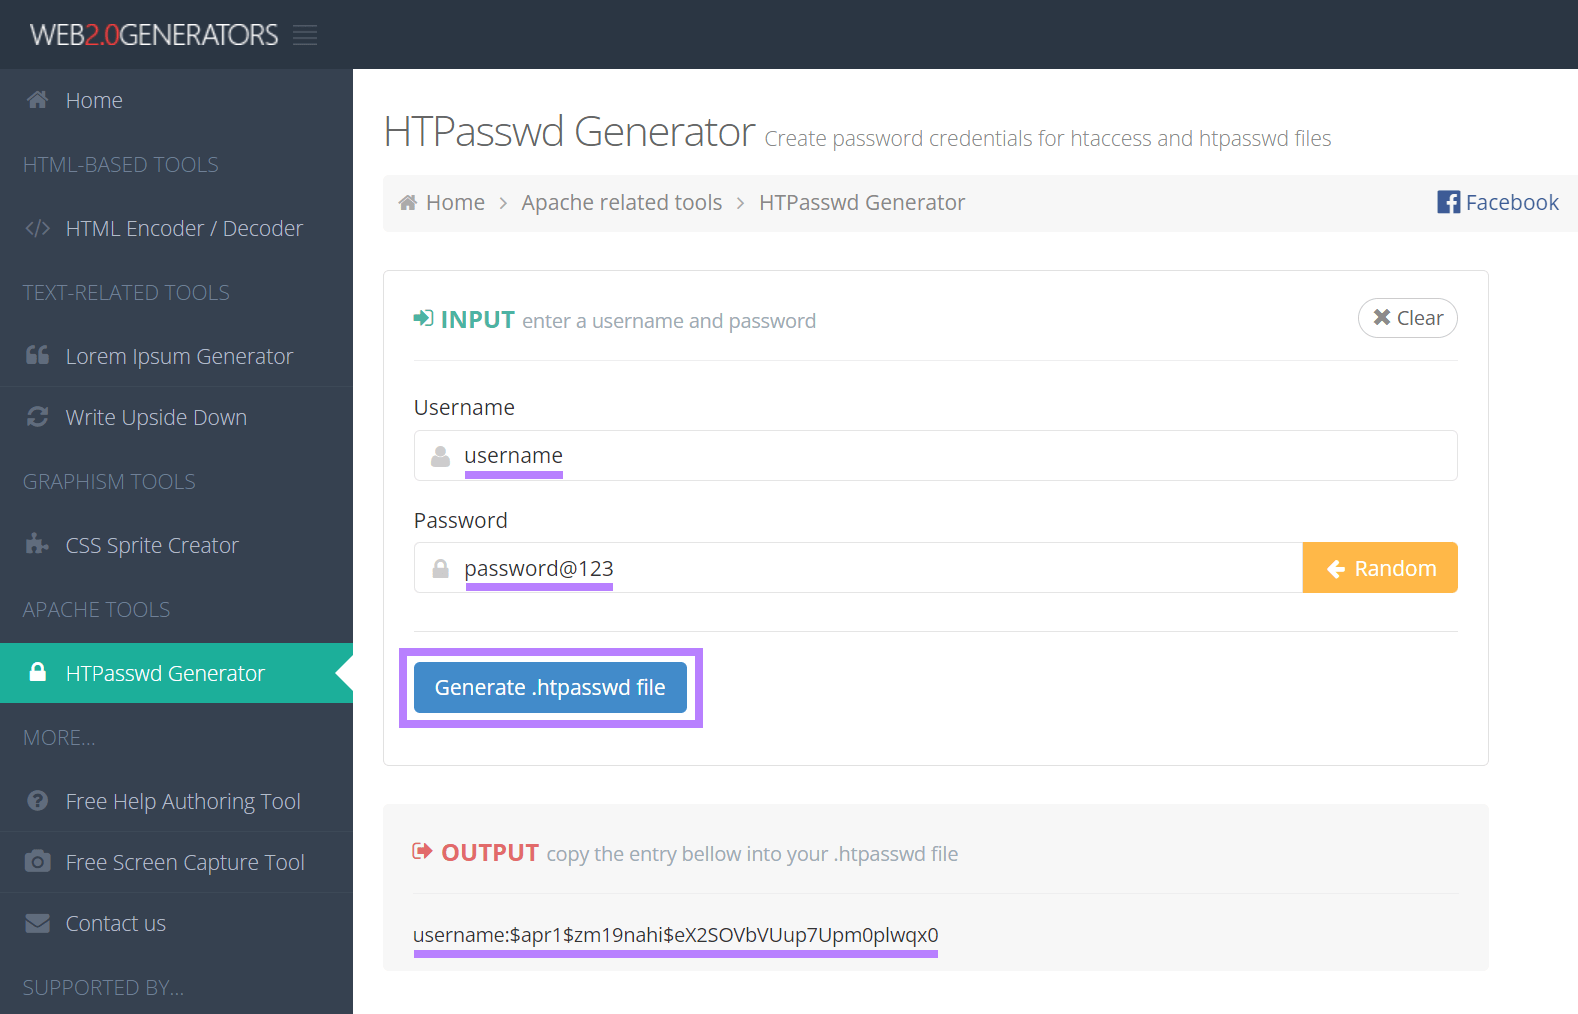 HTPasswd Generator tool showing the encryption of a password.